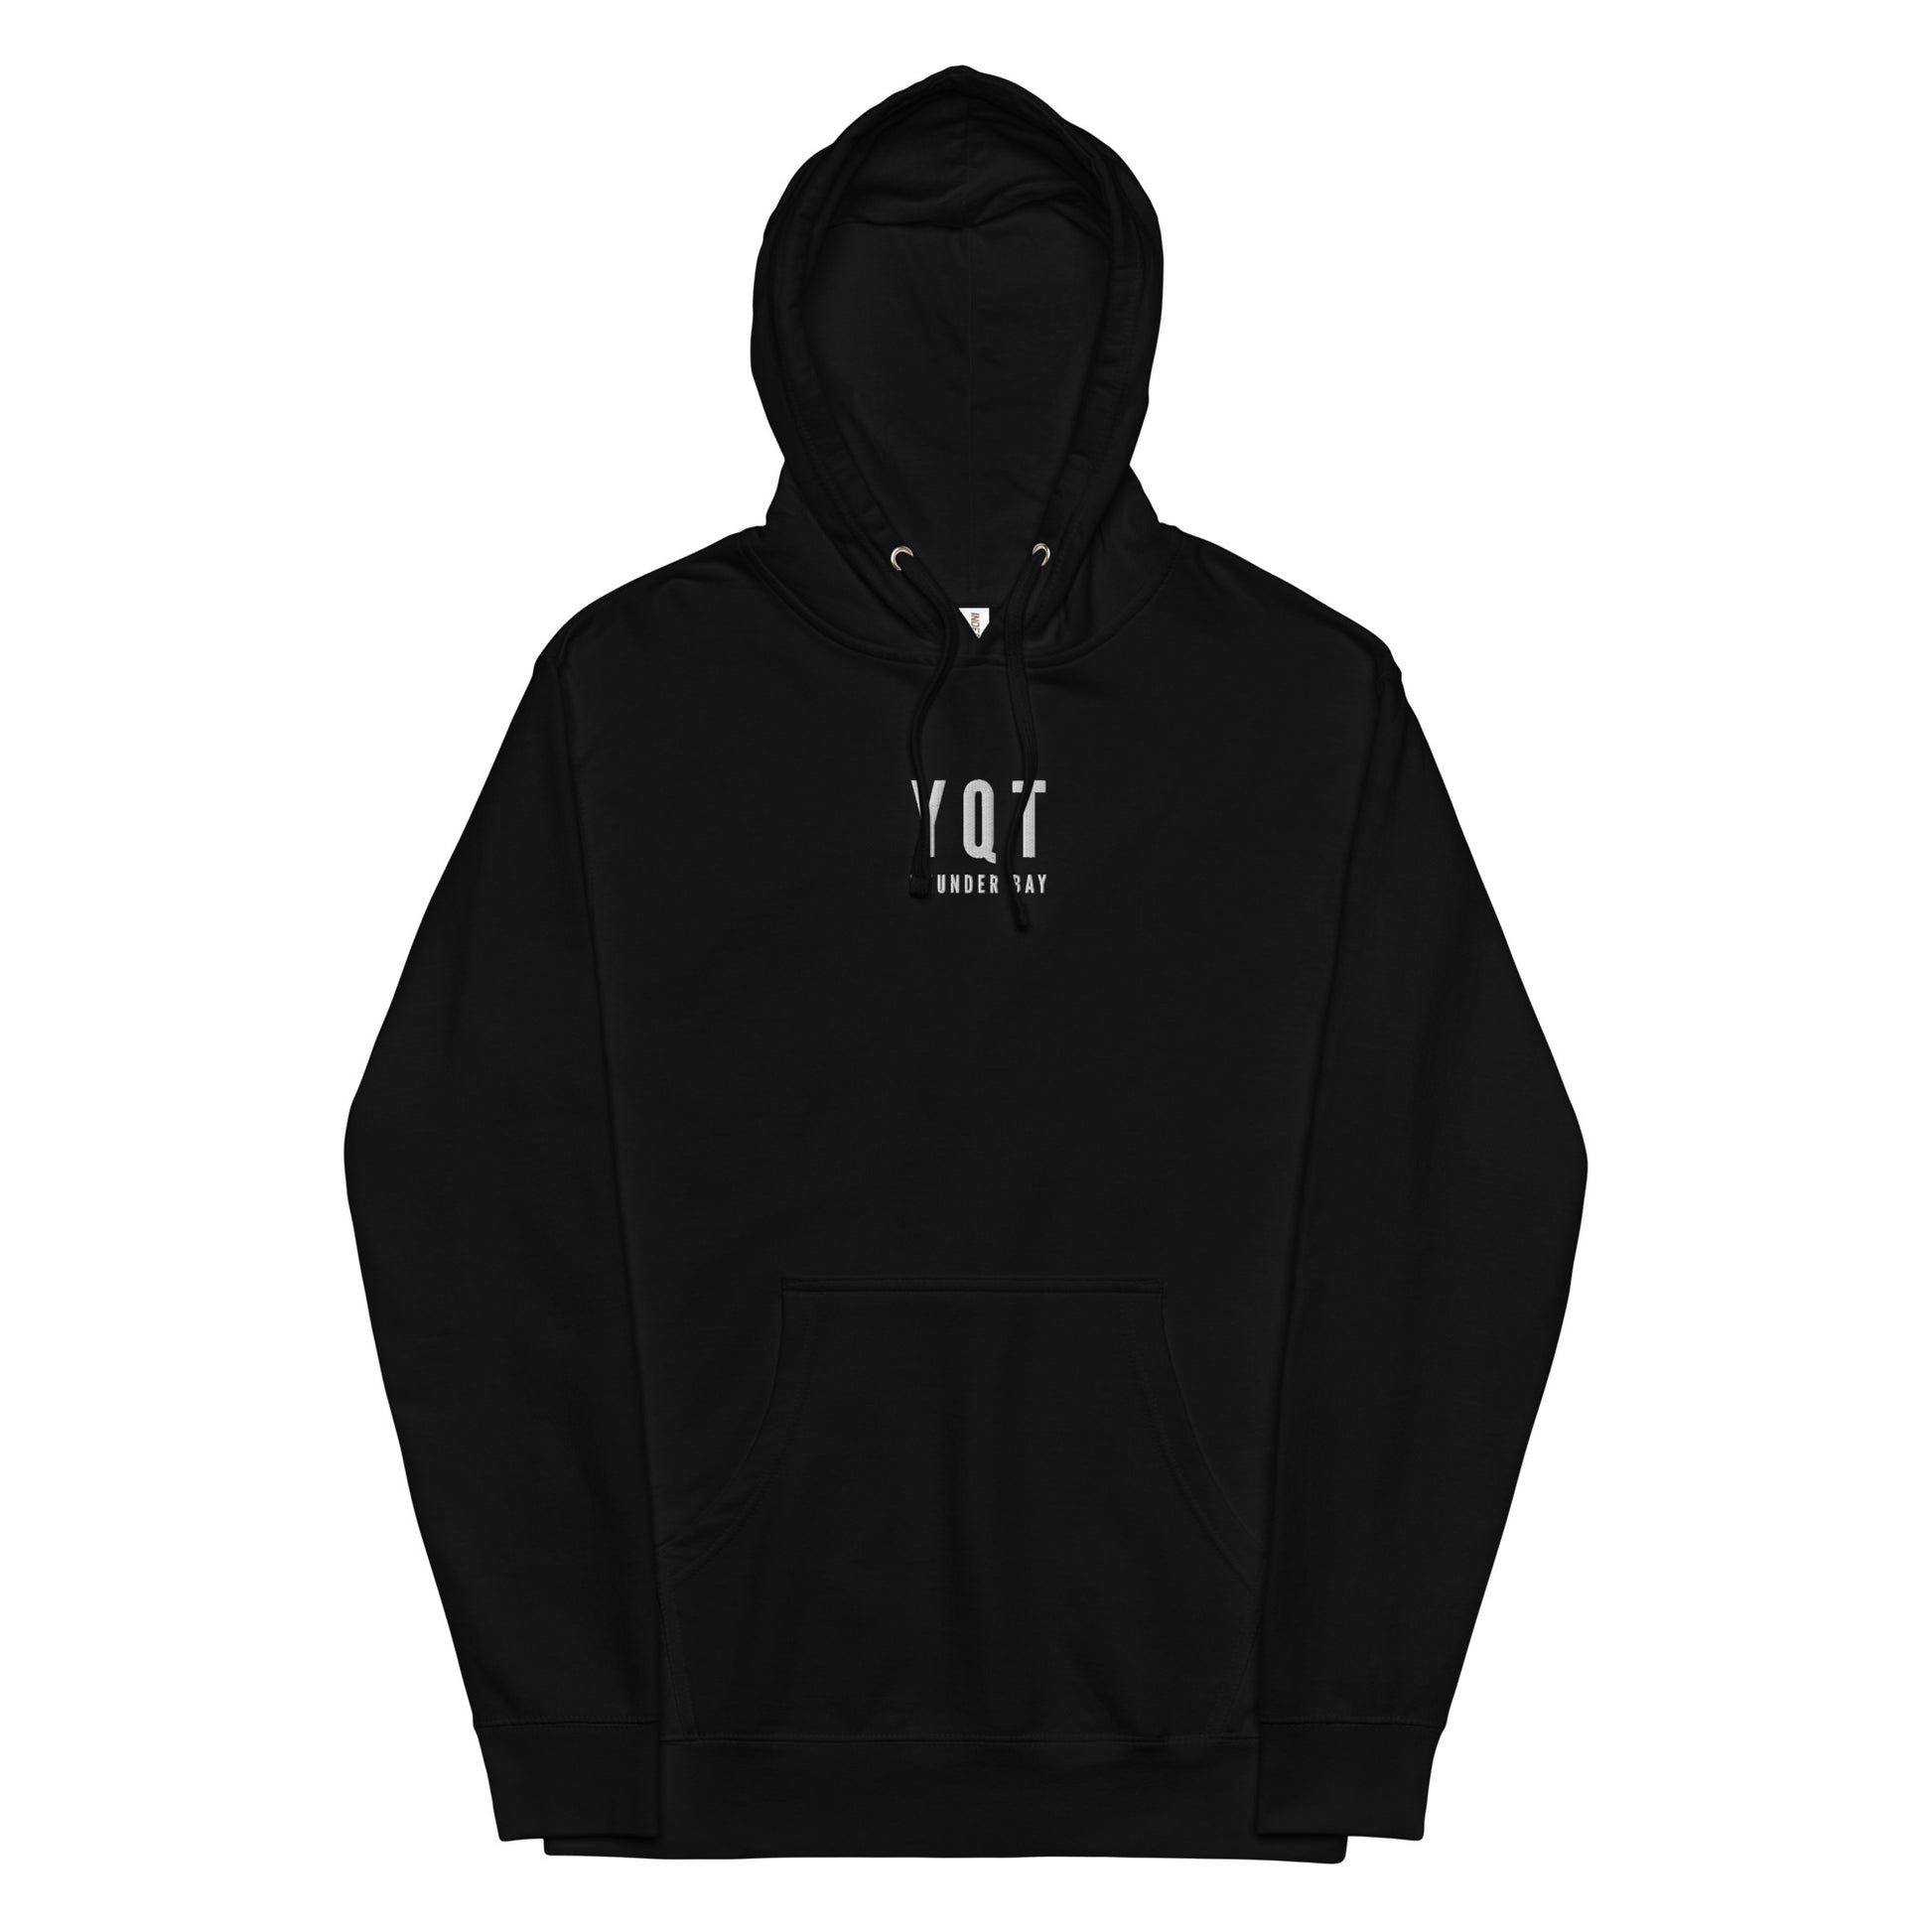 City Midweight Hoodie - White • YQT Thunder Bay • YHM Designs - Image 10